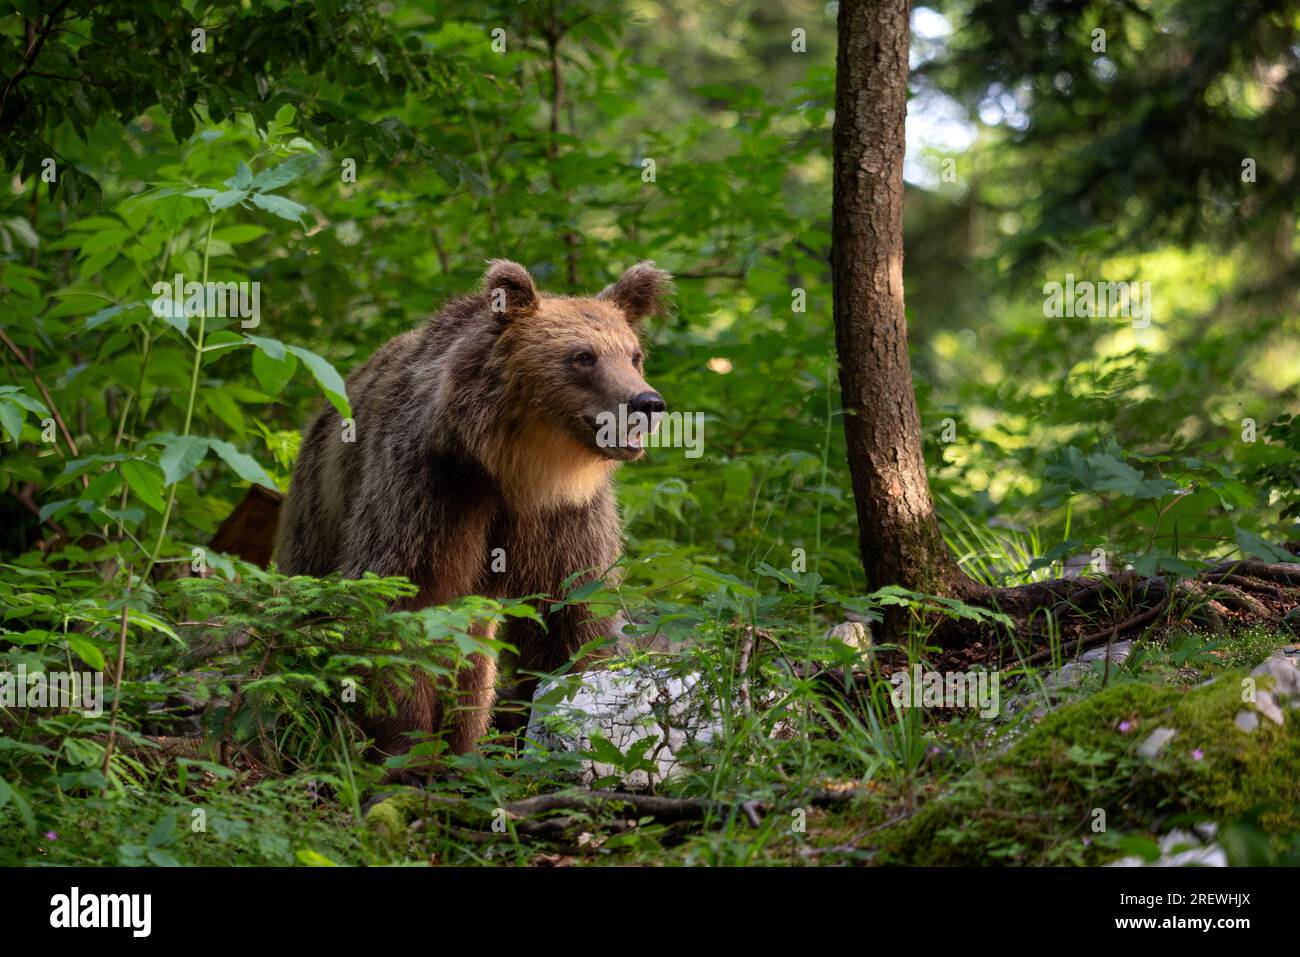 Brown Bear - Ursus arctos large popular mammal from European forests and mountains, Slovenia, Europe. Stock Photo